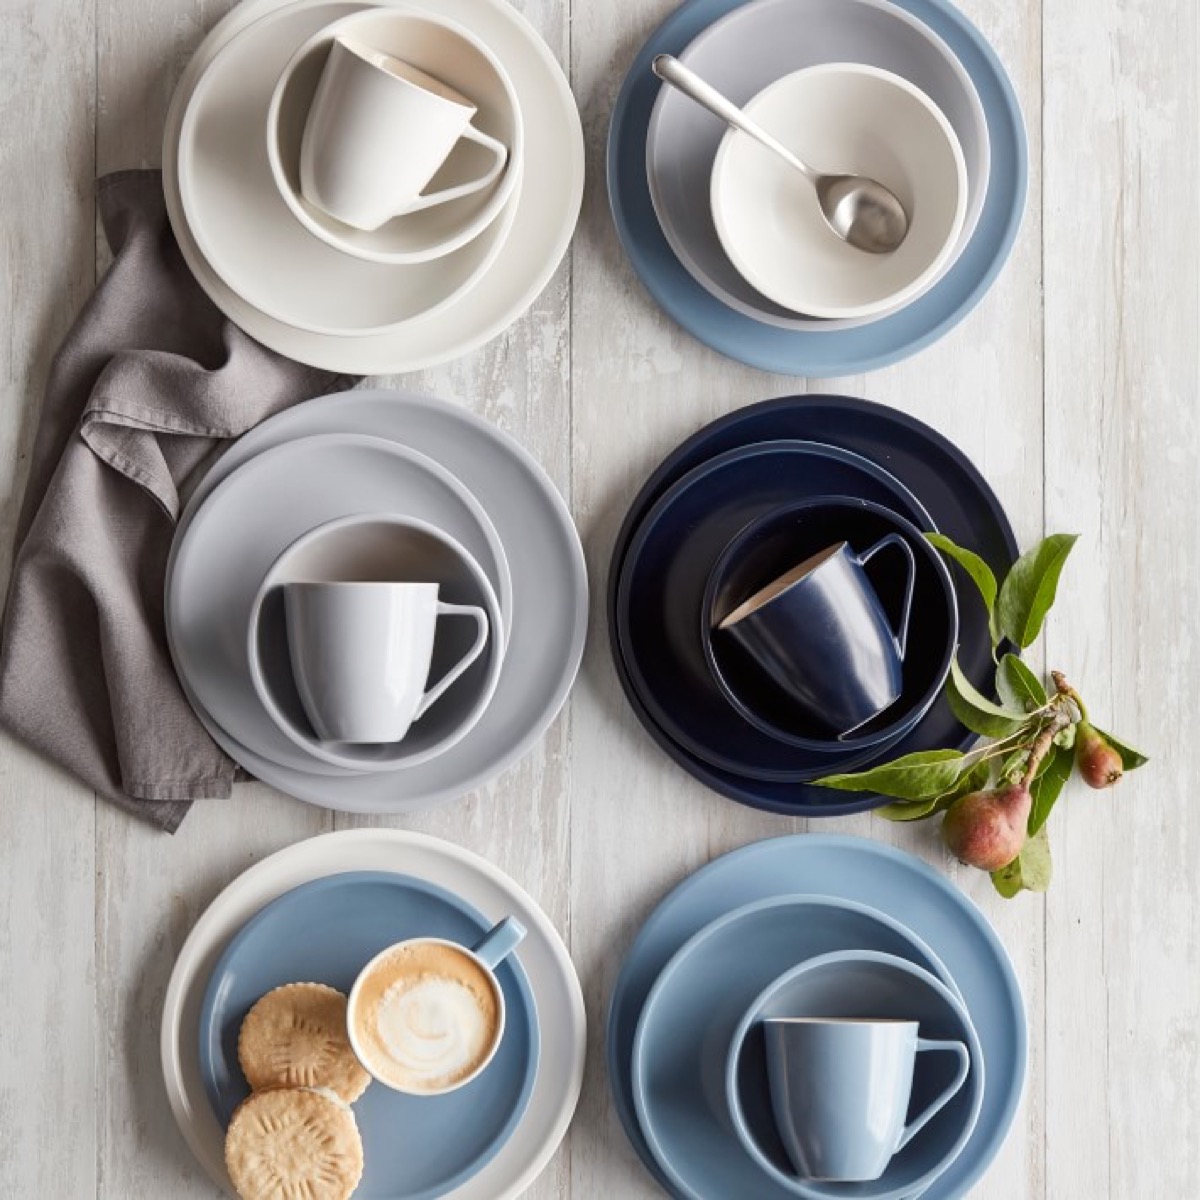 mix and match plate and cup sets